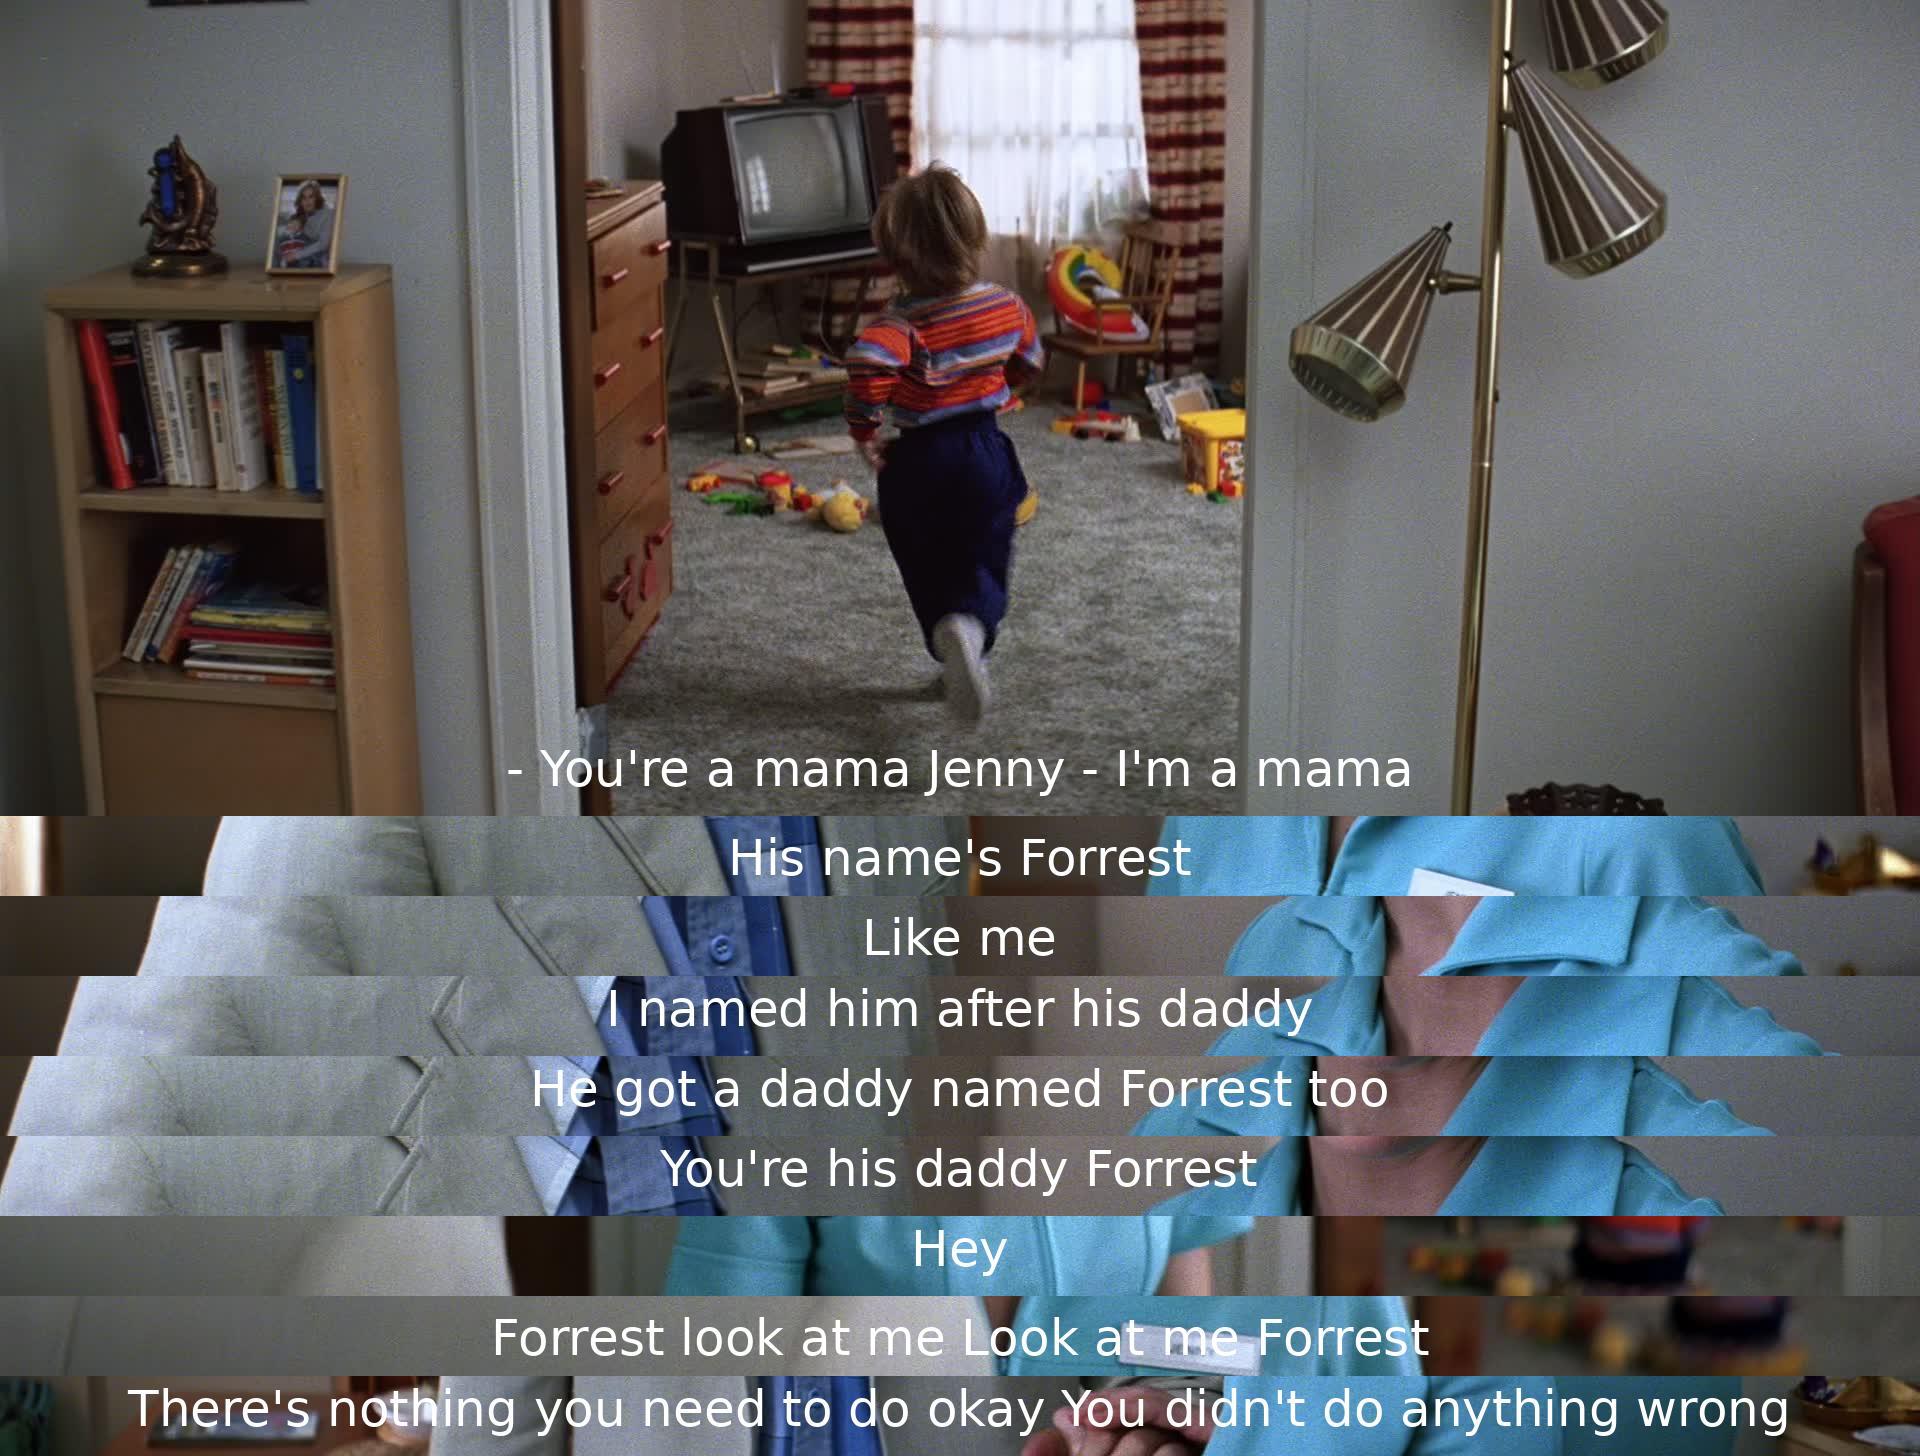 Jenny tells Forrest he is a father to their son, also named Forrest. She reassures him that he did nothing wrong and there is nothing he needs to do.